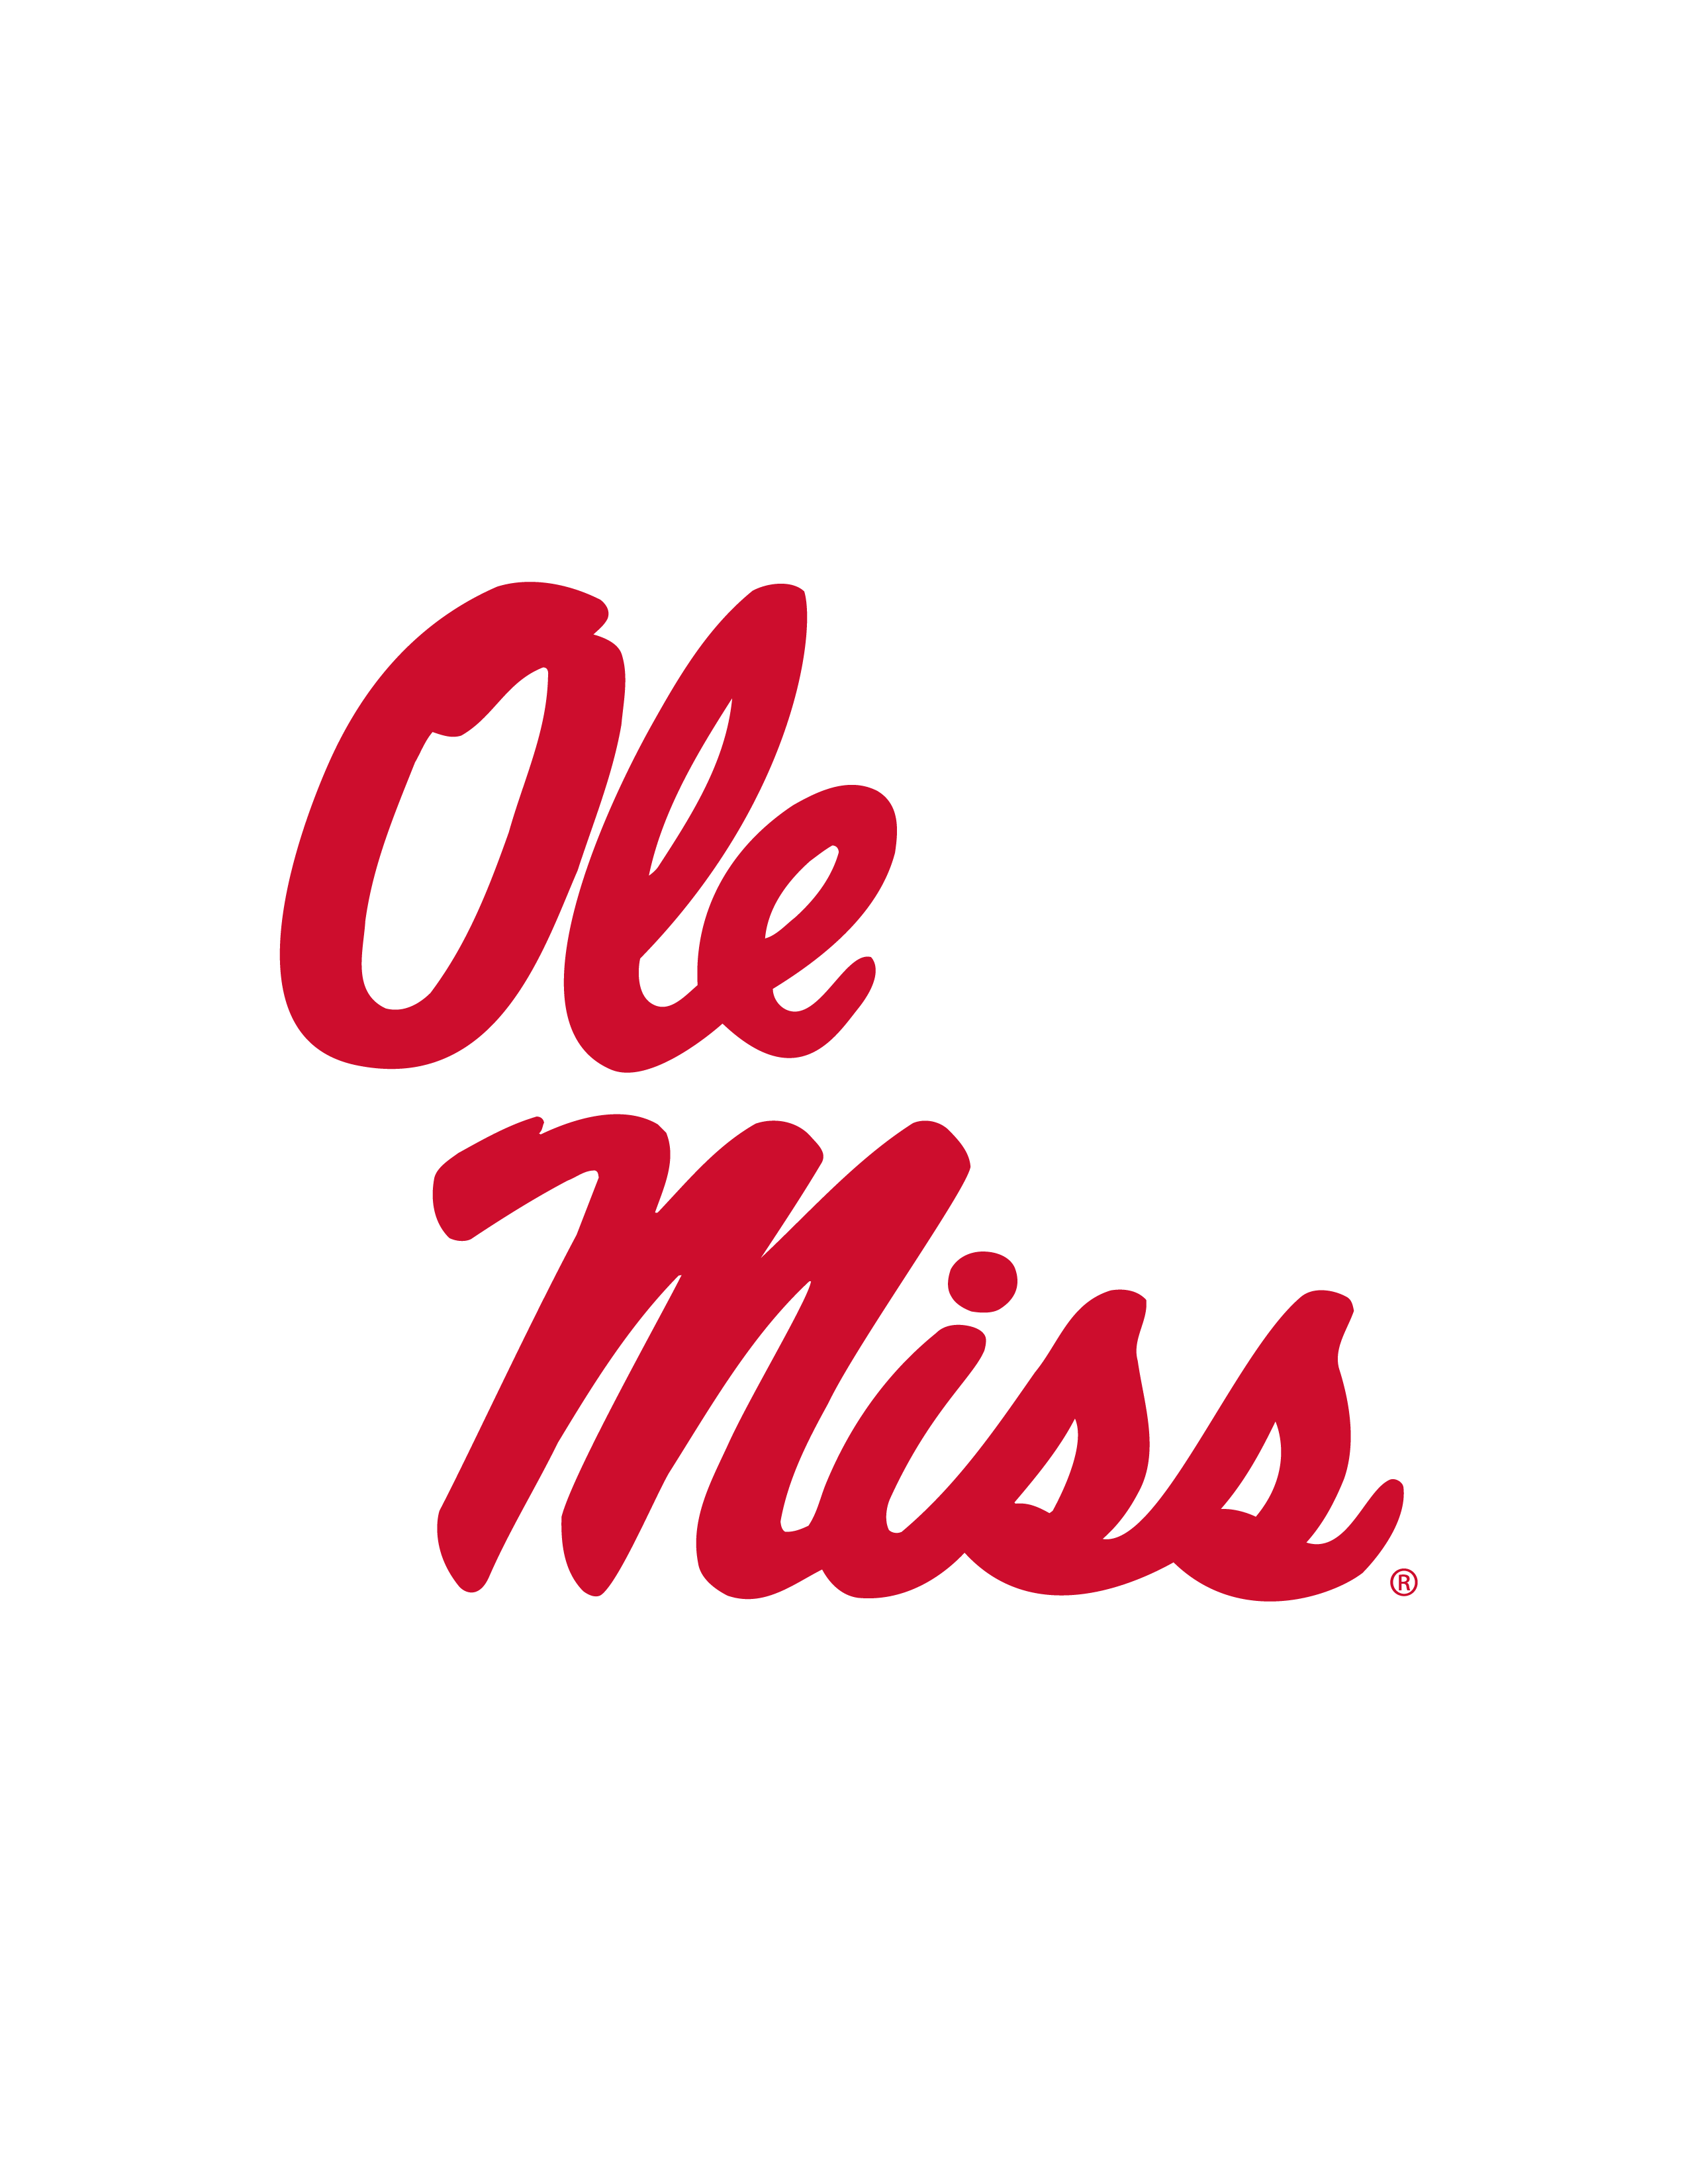 Created With Raphaël 2.2.0 Ole Miss Usm 0 5 10 15 Hits - Ole Miss, Transparent background PNG HD thumbnail